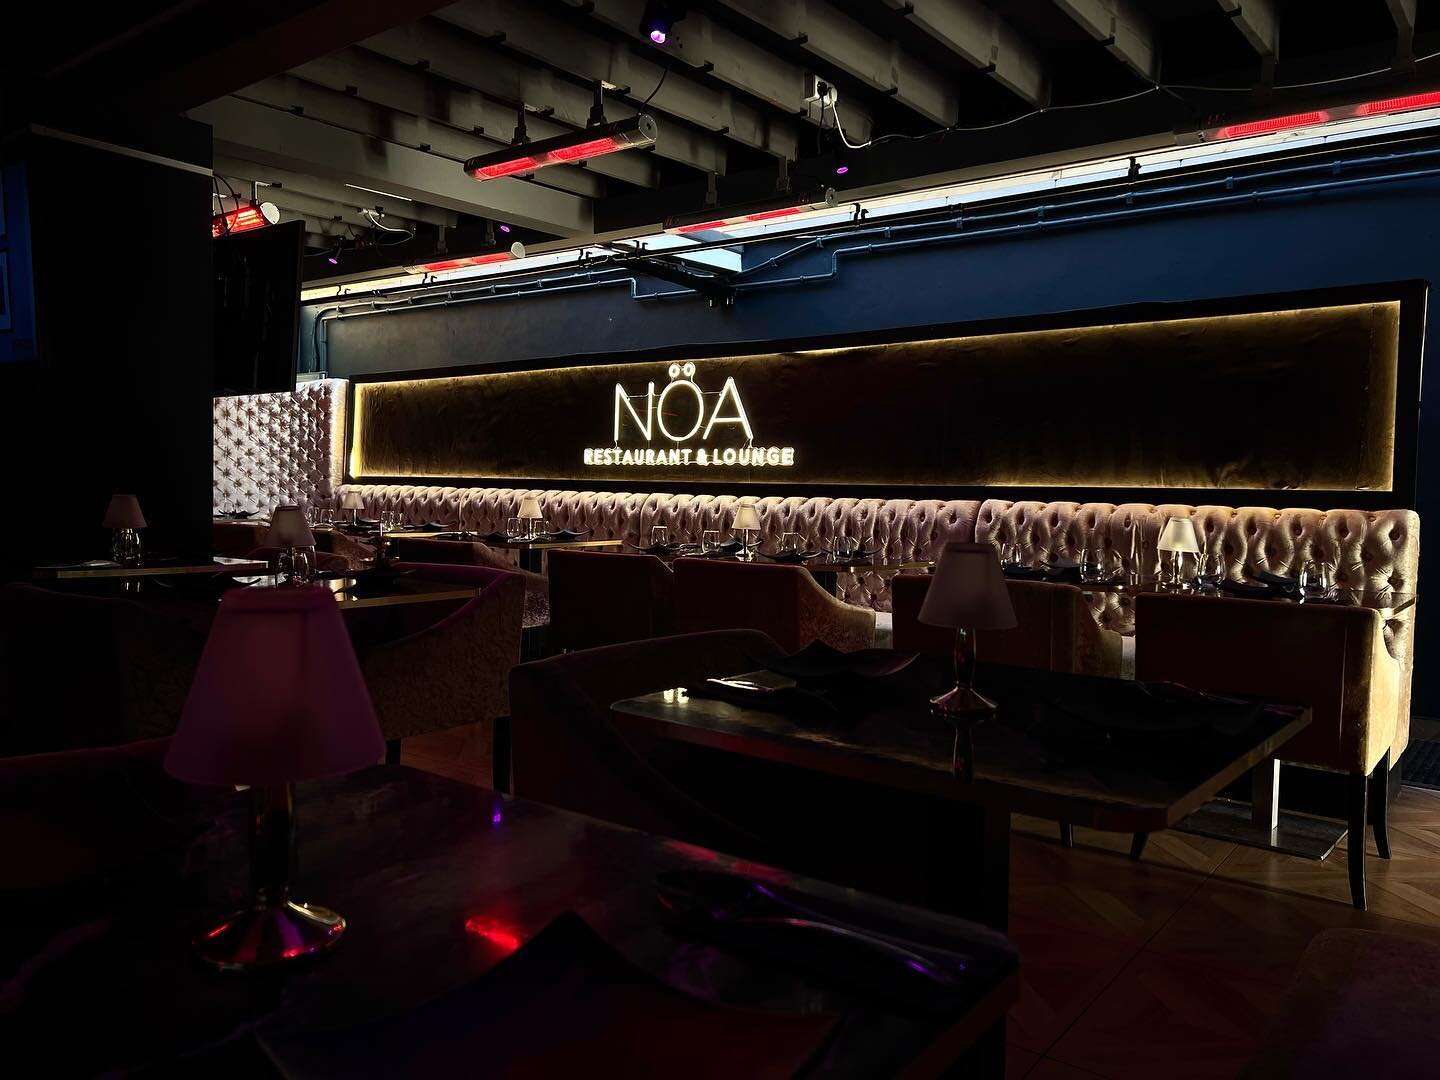 Sun is out 🌞, Tables set, cutlery polished, grills on 🔥

Have you booked your table for this weekend?

Book your table at N&Ouml;A ❤️
Visit www.noalounge.com to reserve your table. On the day bookings, please call 01923 545047. Phone lines open aft